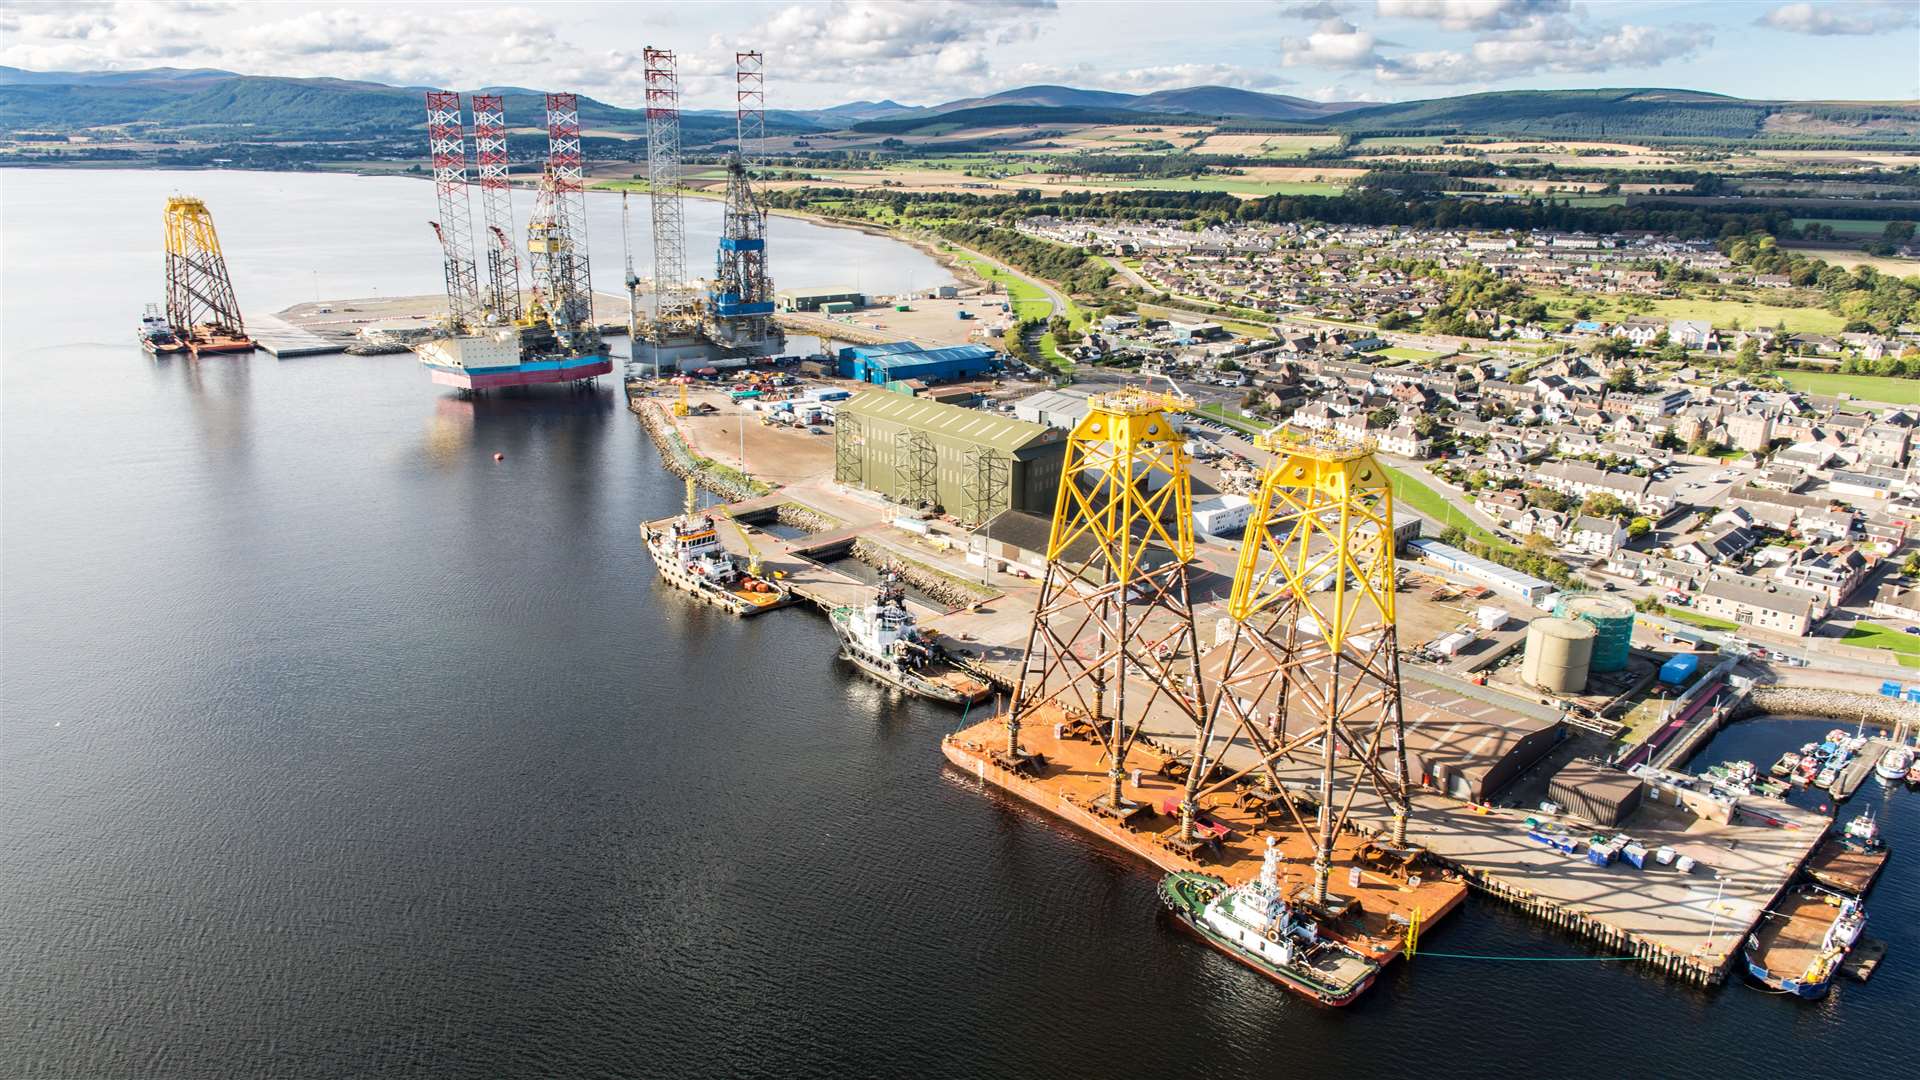 The Port of Cromarty Firth itself is an example of the blue economy's potential and diversity.